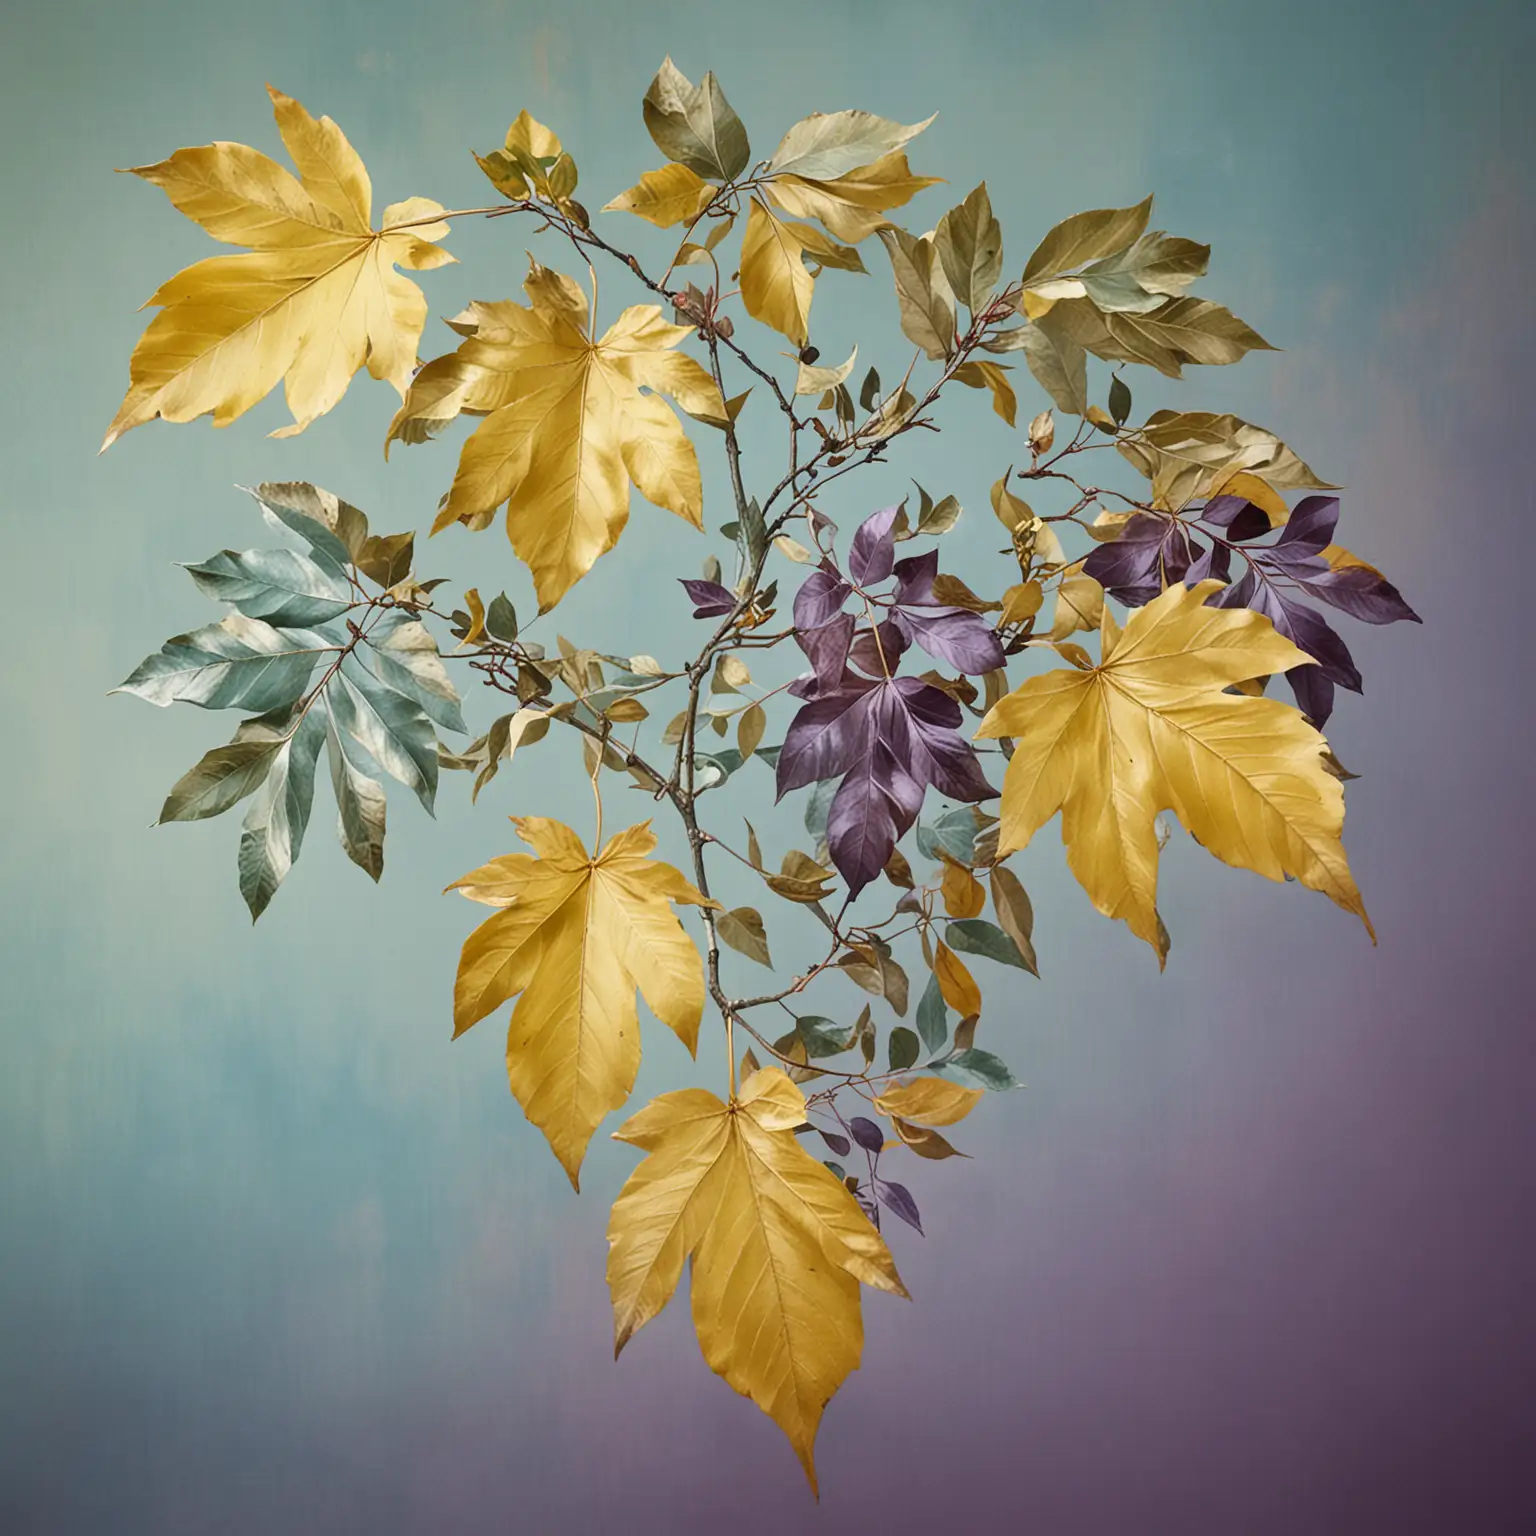 Botanical Illustration of Hanging Pale BlueGreen Leaves with Purple and Yellow Background